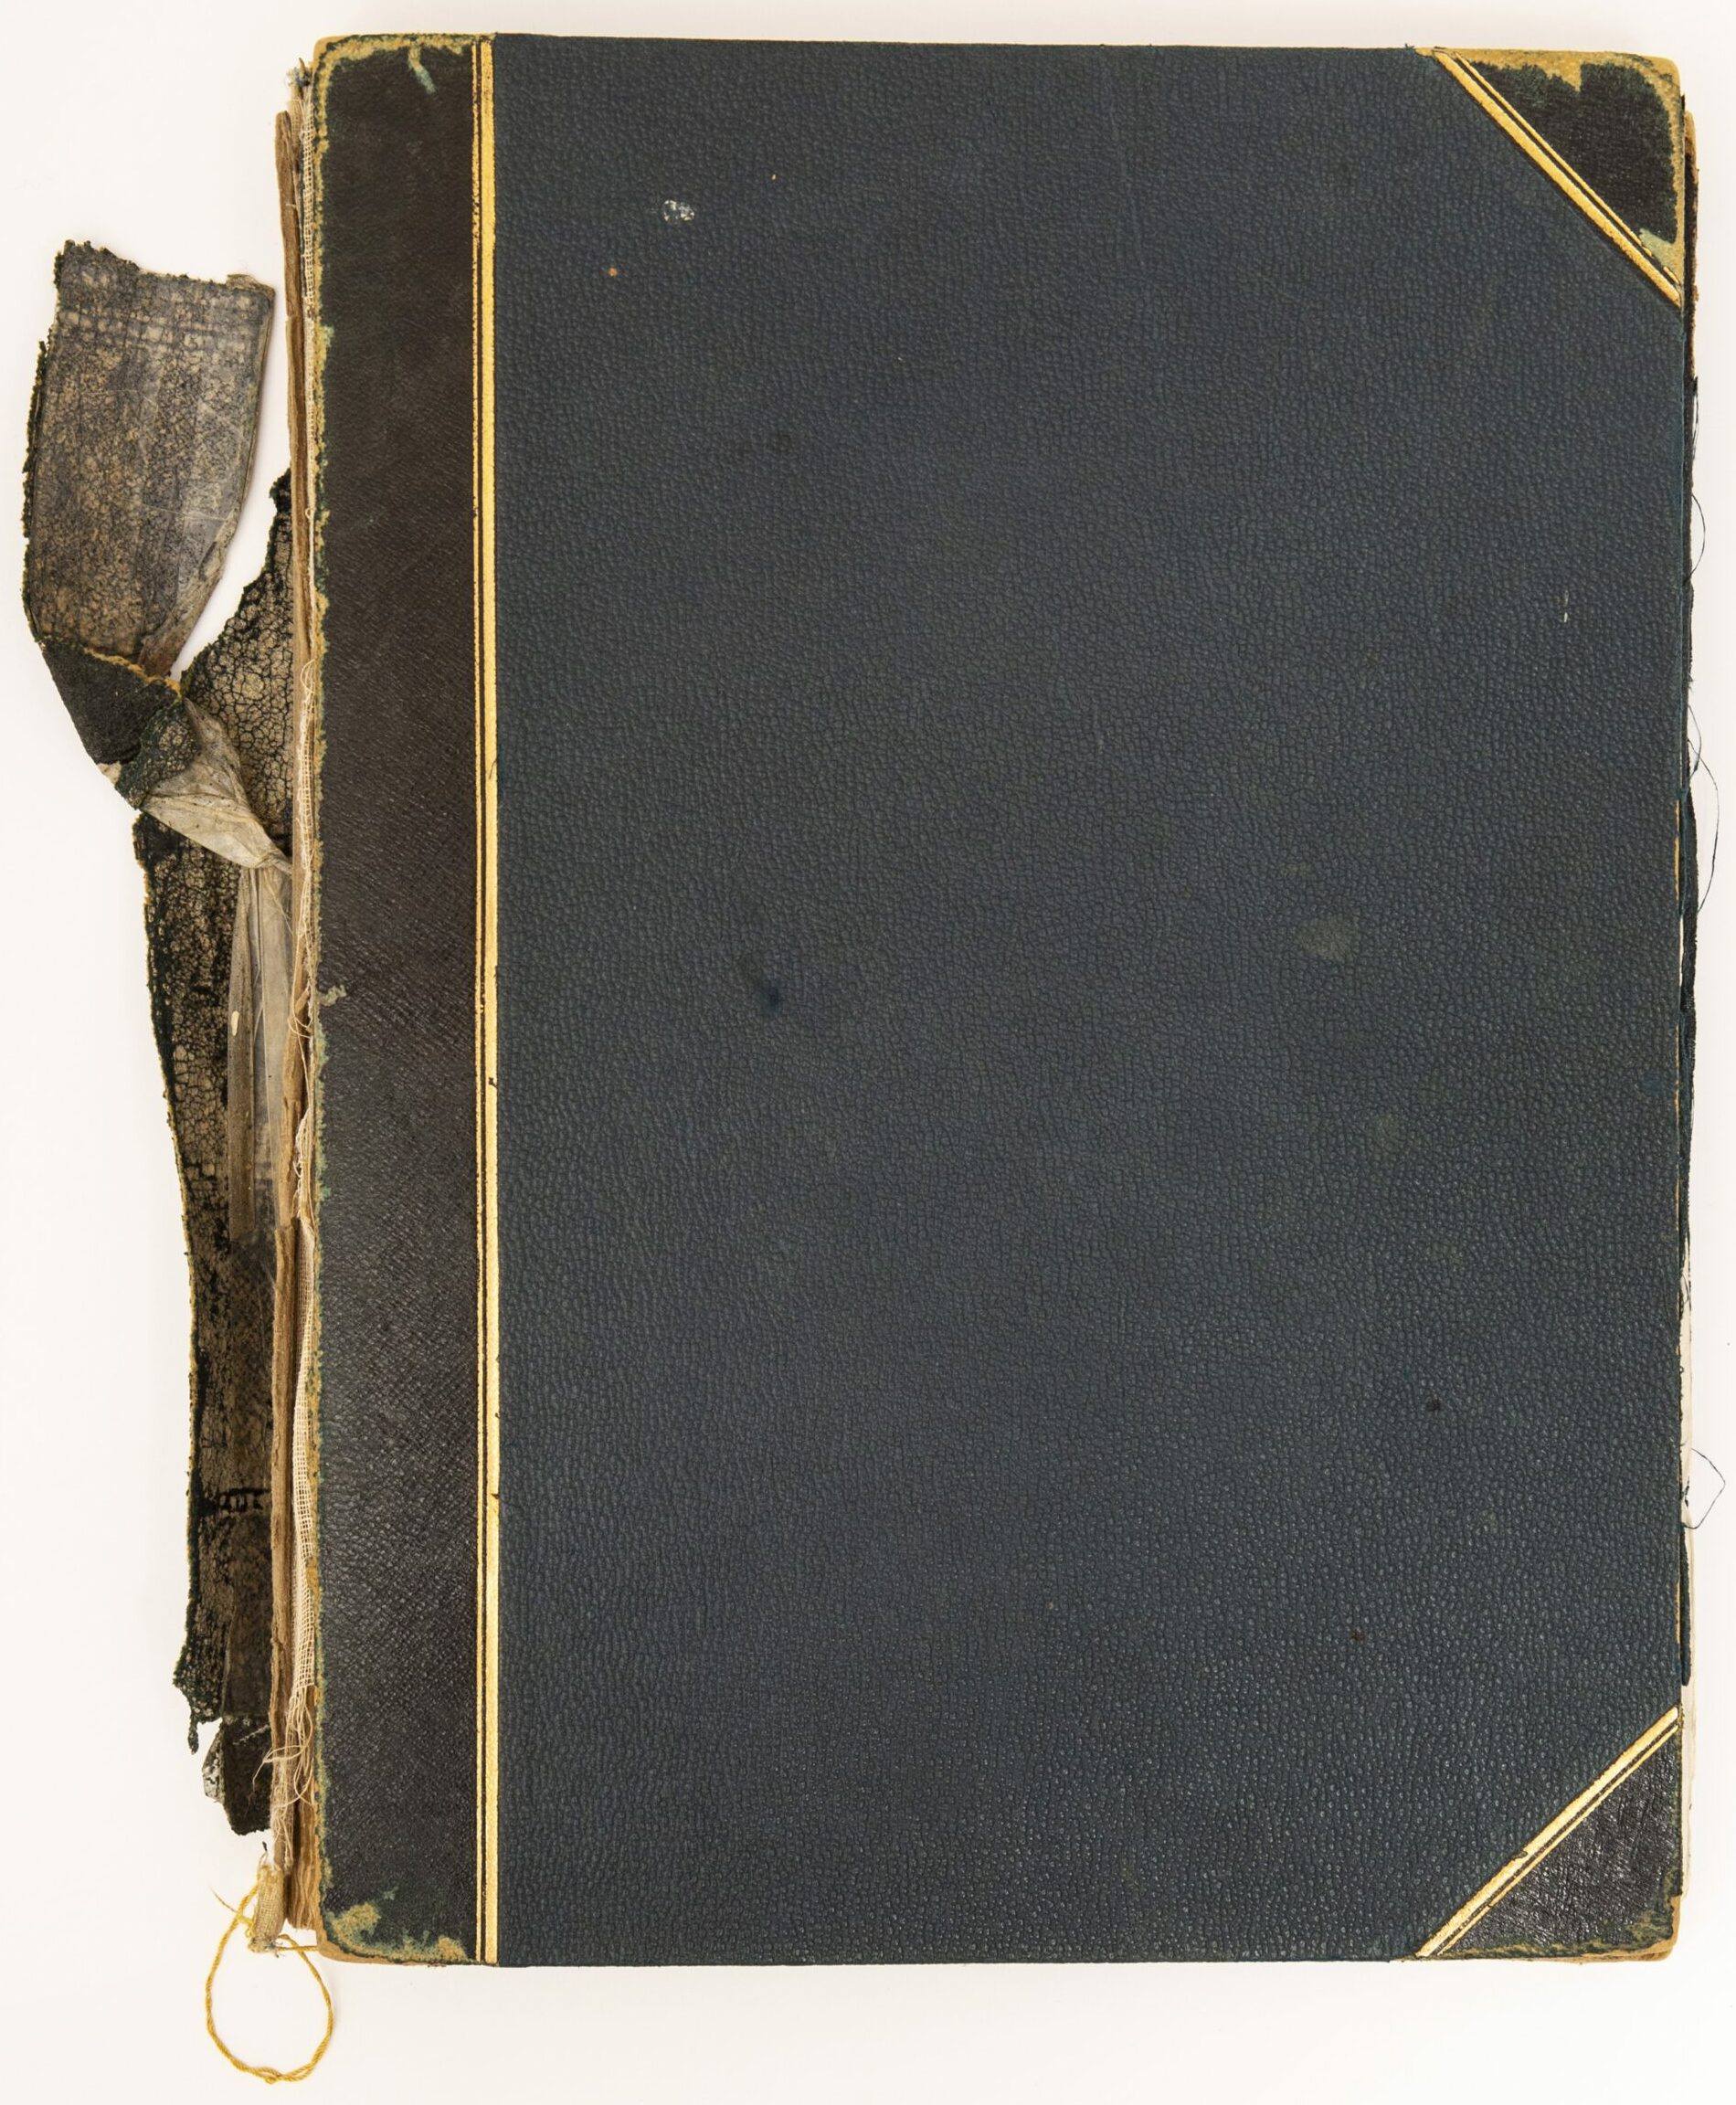 The front cover of the 'Memorials of Robert Gill', 1889. The album has a hard cover, bound in blue fabric and leather with some gold tooling.